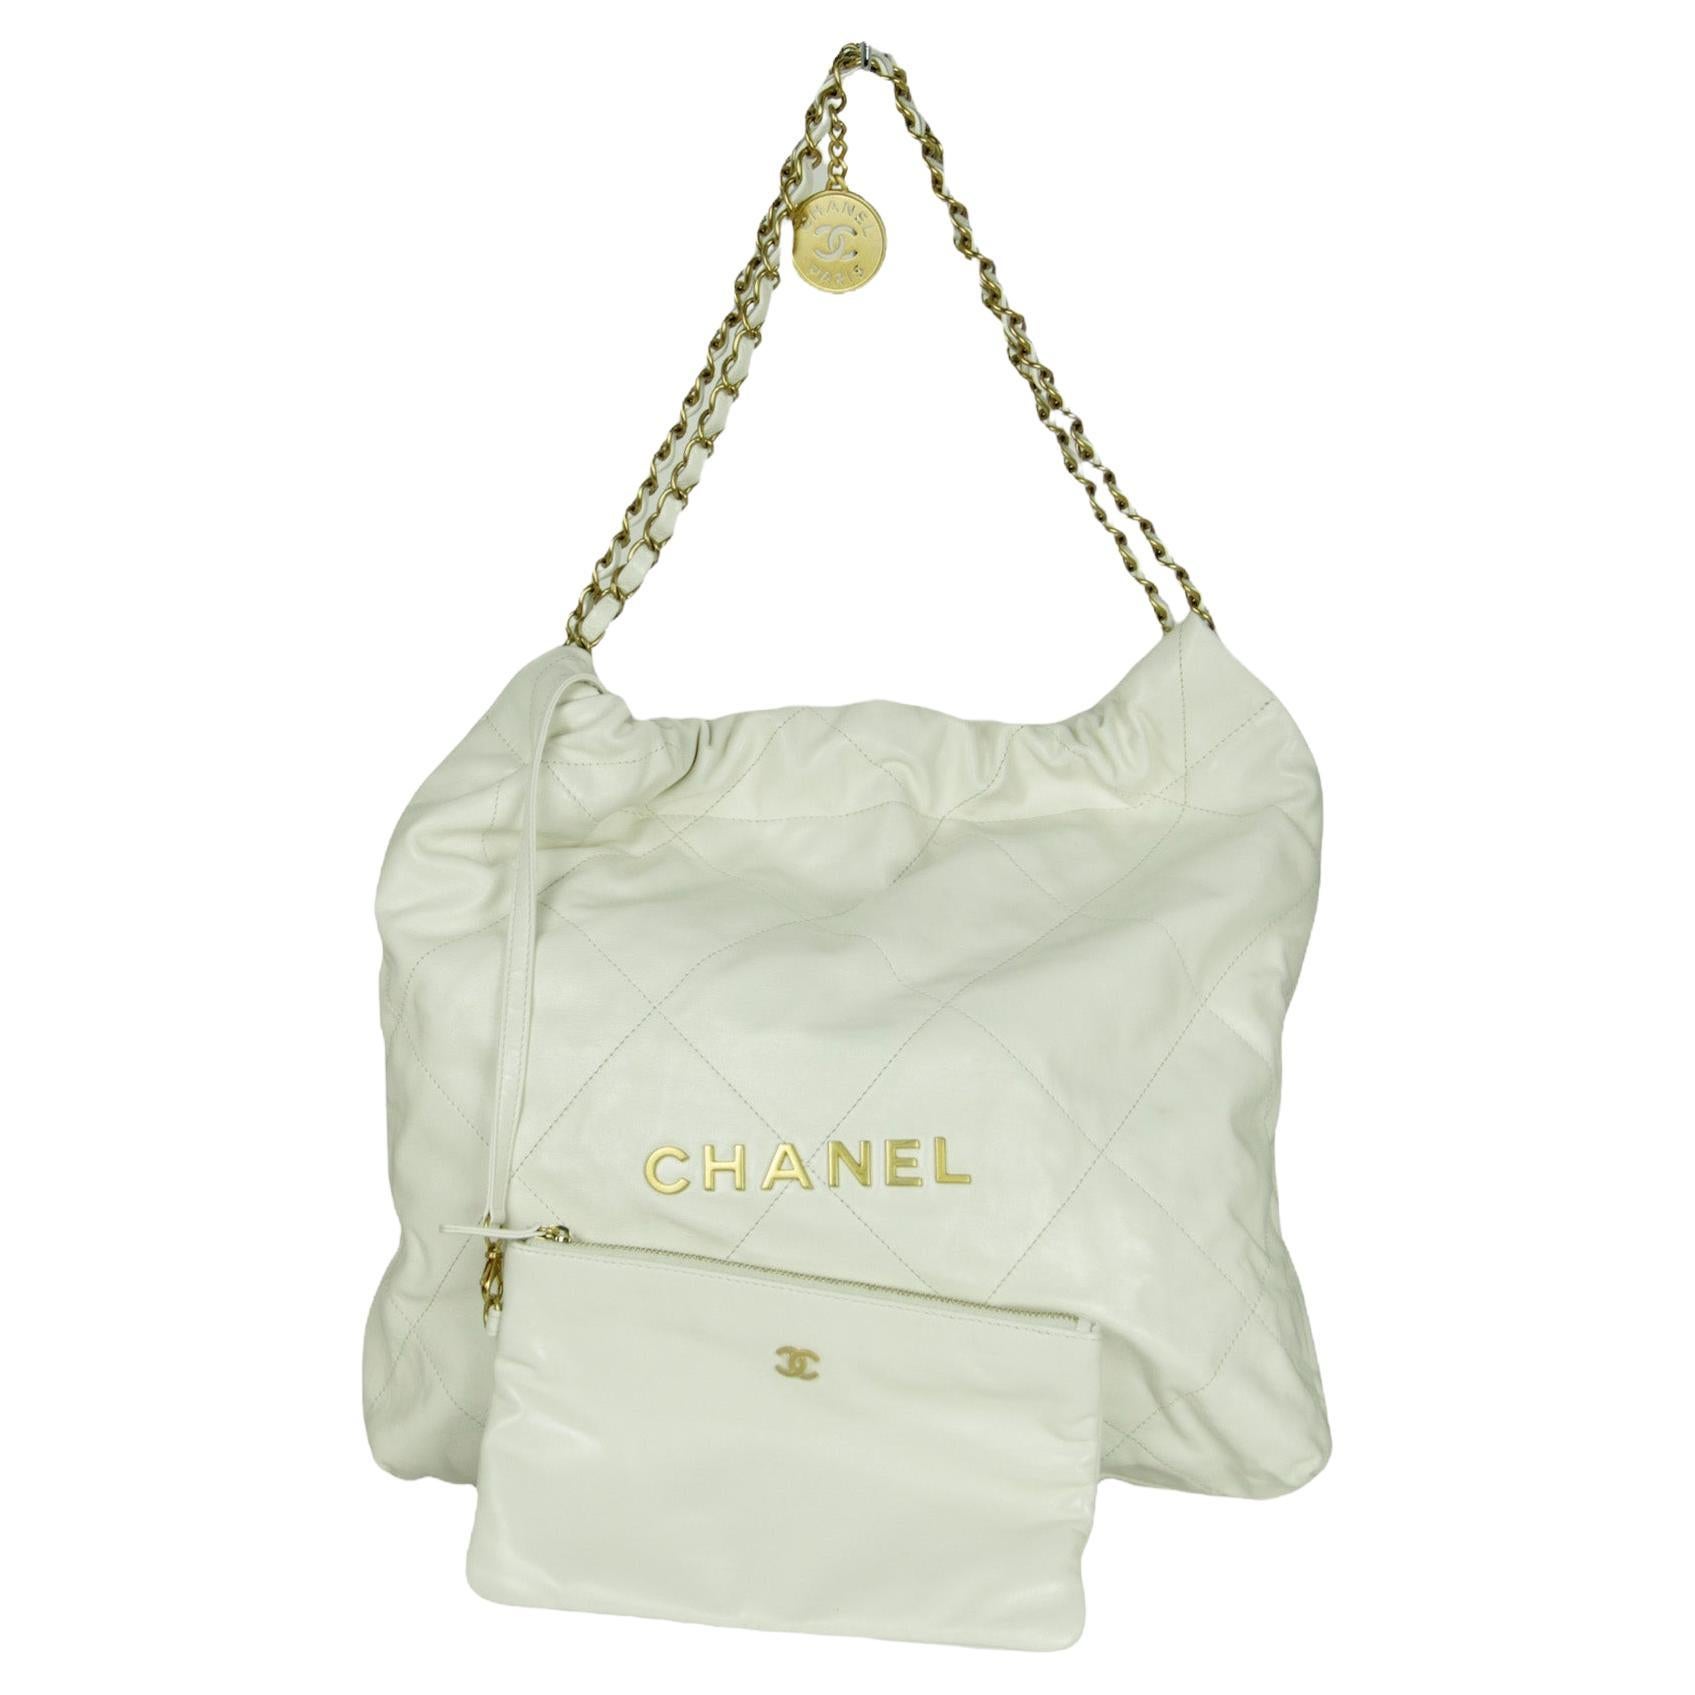 Chanel White Leather Chanel 22 Tote Bag. Features gold hardware spelling out CHANEL

Made In: Italy
Color: White
Hardware: Goldtone
Materials: Leather, metal
Lining: Beige textile
Closure/Opening: Open top 
Exterior Pockets: None
Interior Pockets: